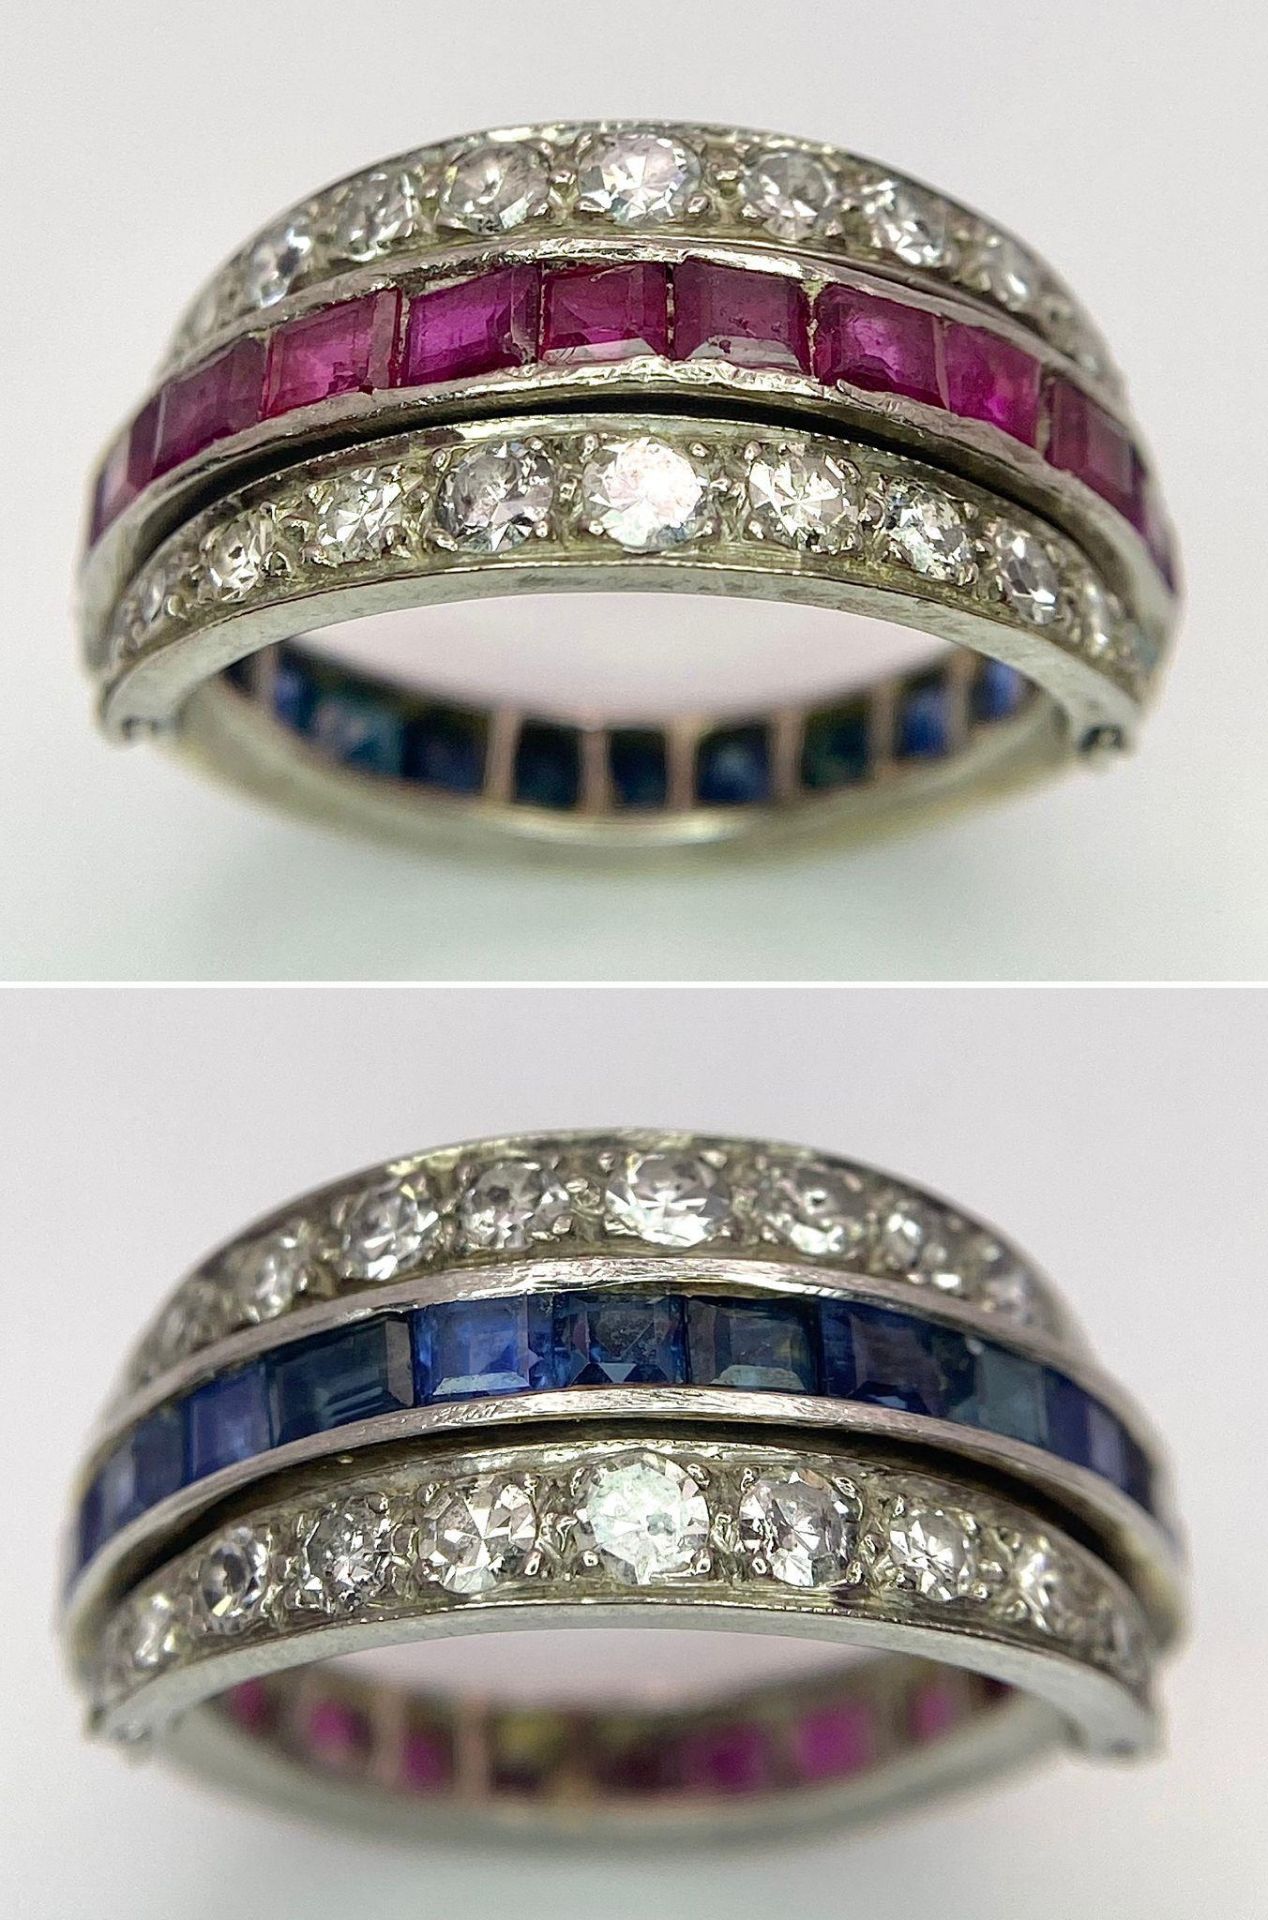 An 9k White Gold Sapphire, Diamond and Ruby Flip-Over Ring. A central band of rubies and sapphires